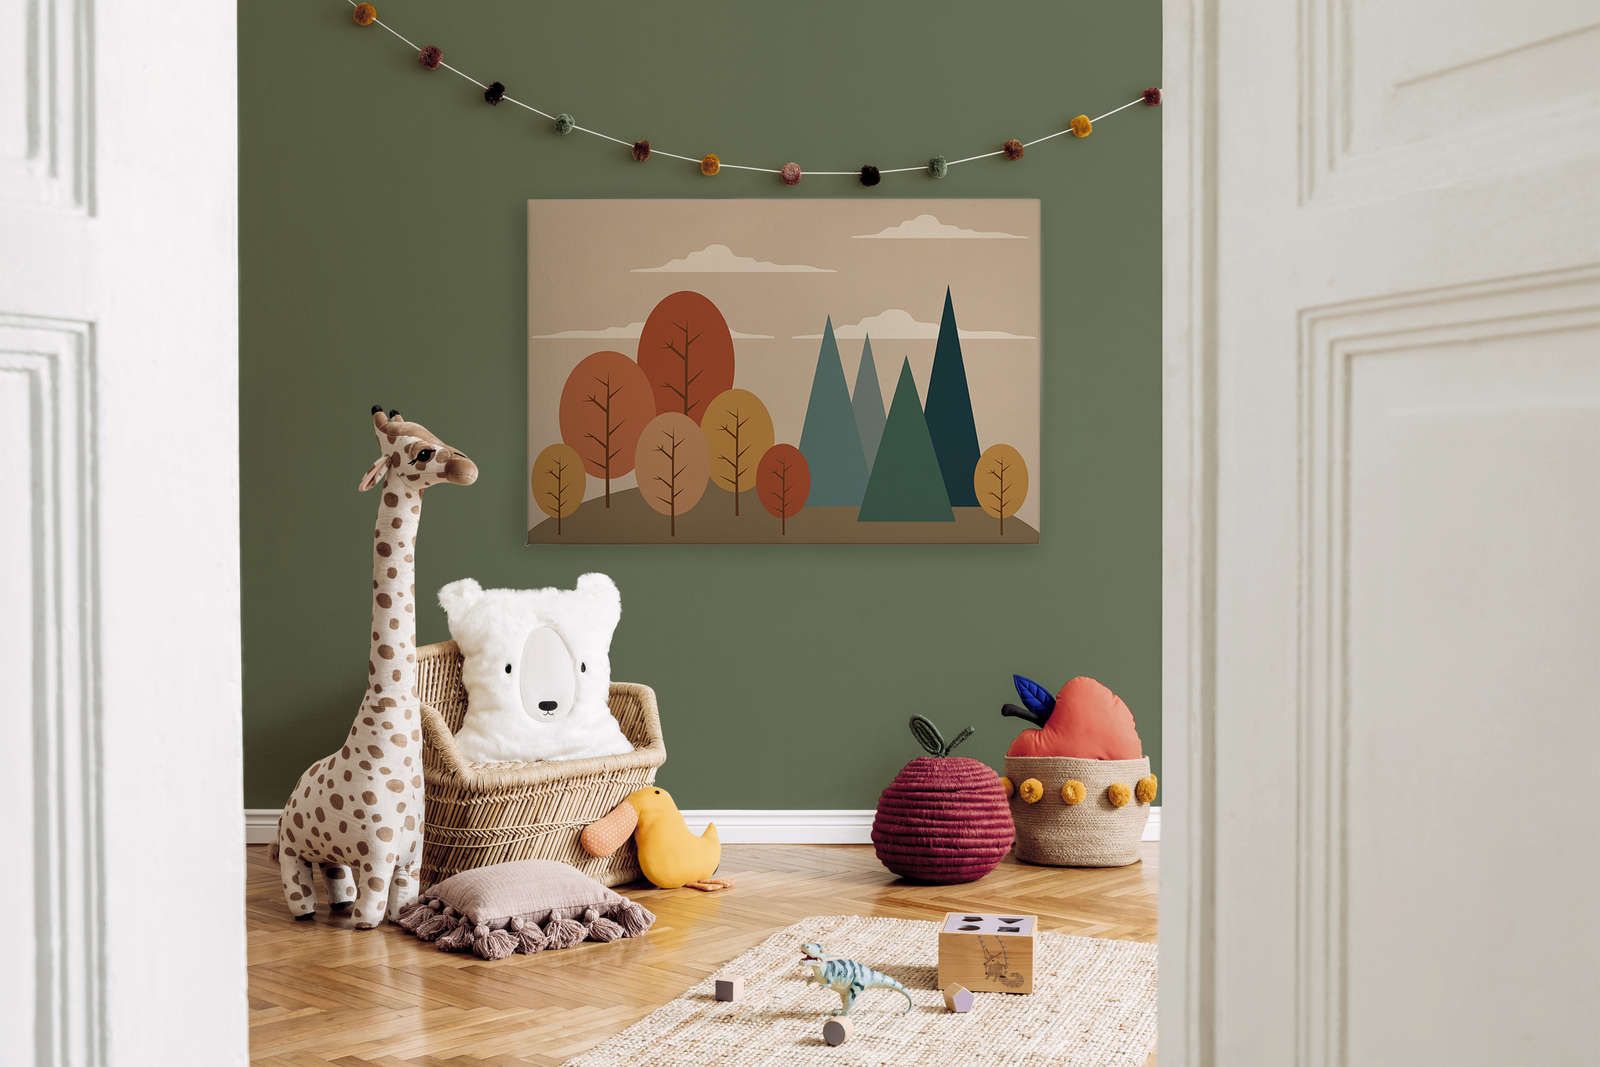             Canvas Enchanted Forest with Geometric Shapes - 120 cm x 80 cm
        